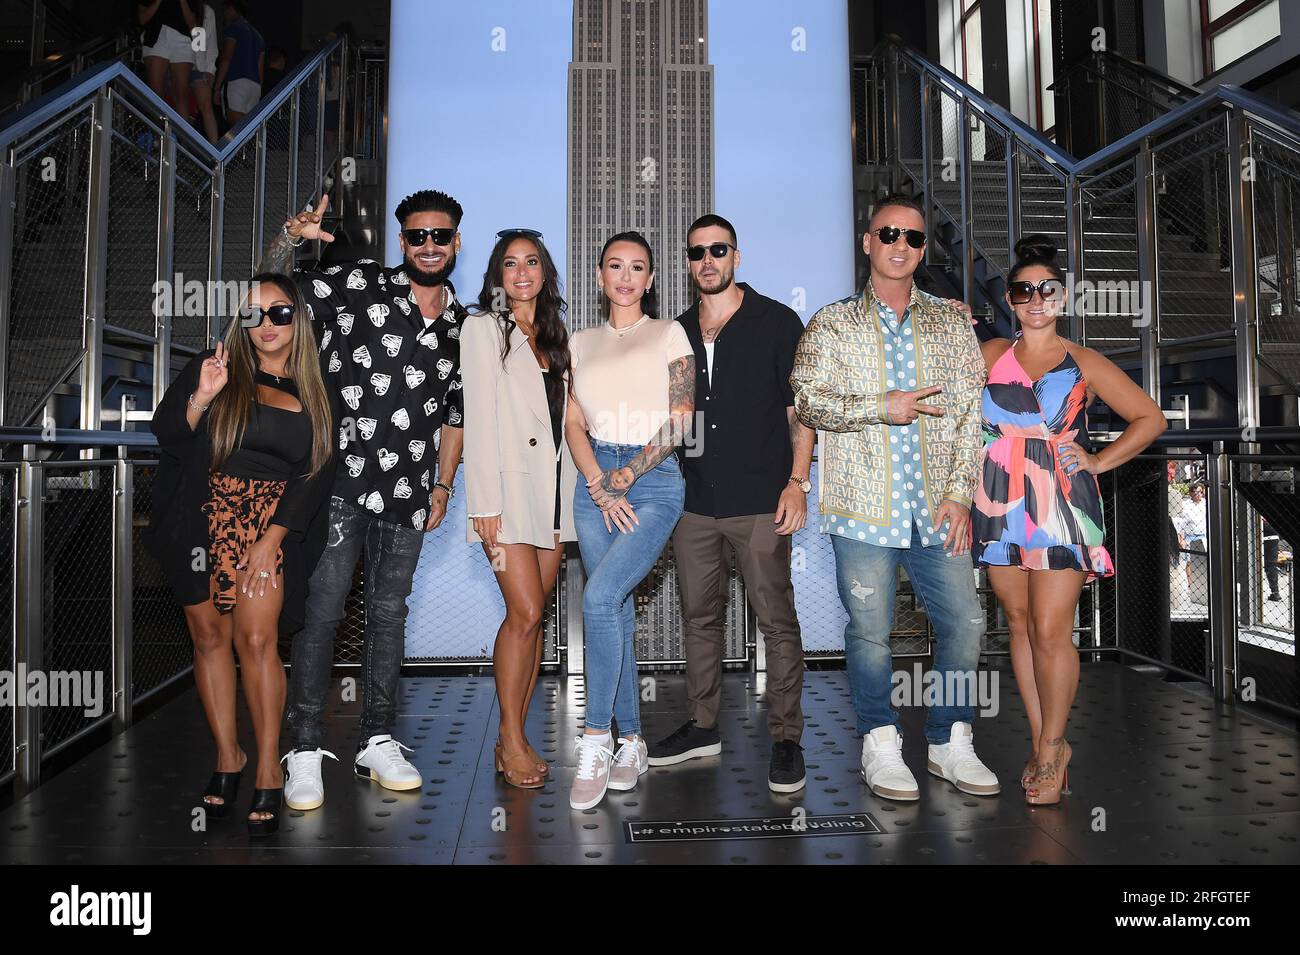 New York, USA. 03rd Aug, 2023. ‘Jersey Shore Family Vacation' cast members (l-r) Nicole ‘Snooki' Polizzi, Paul 'DJ Pauly D' DelVecchio, Sammi 'Sweetheart' Giancola, Jenni 'JWOWW' Farley, Vinny Guadagnino, Mike ‘The Situation' Sorrentino, and Deena Nicole Cortese visit the Empire State Building, New York, NY, August 3, 2023. (Photo by Anthony Behar/Sipa USA) Credit: Sipa USA/Alamy Live News Stock Photo